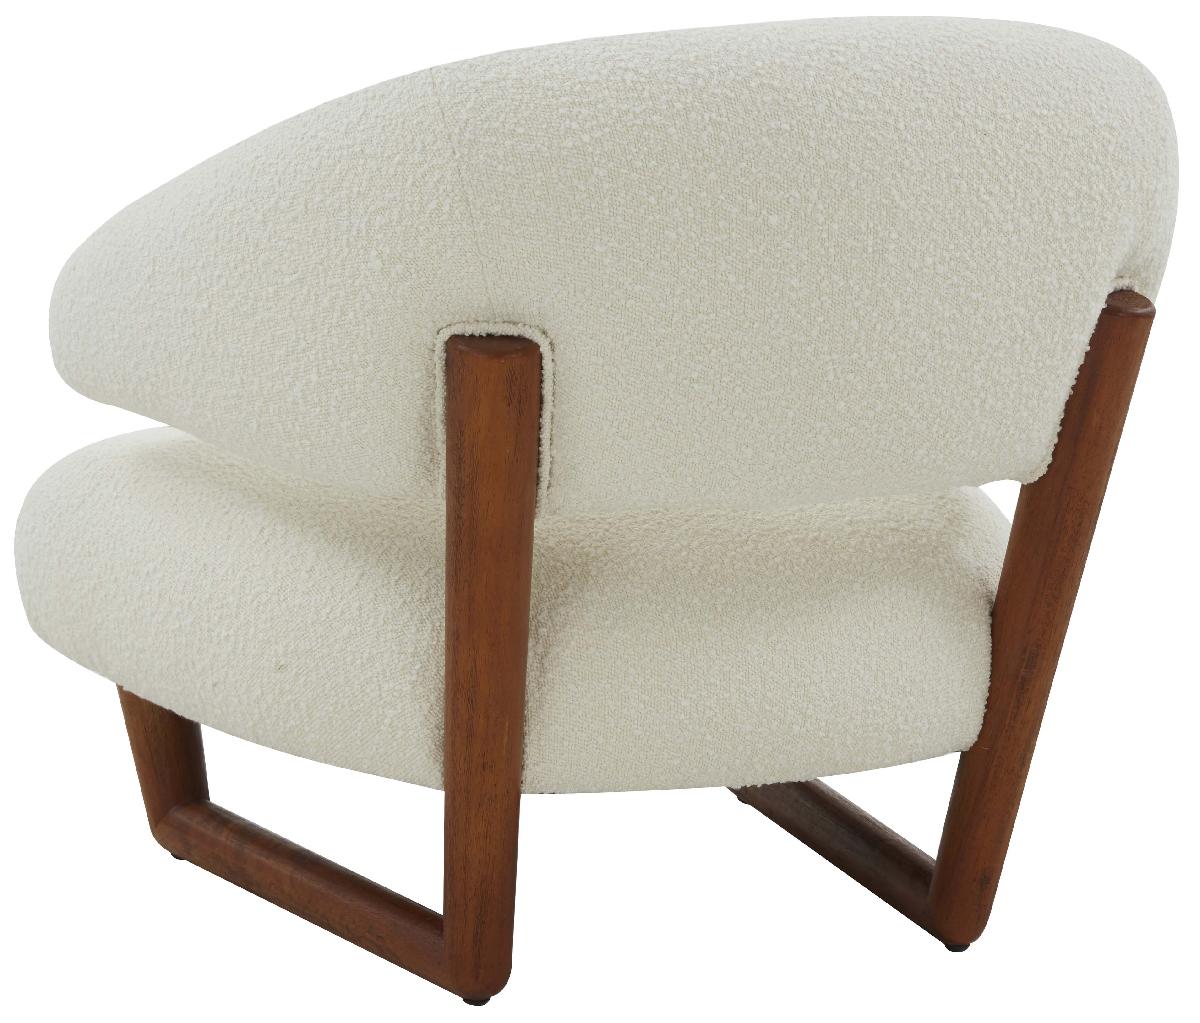 Safavieh Couture Jasmina Boucle And Wooden Legs Accent Chair - Ivory / Brown